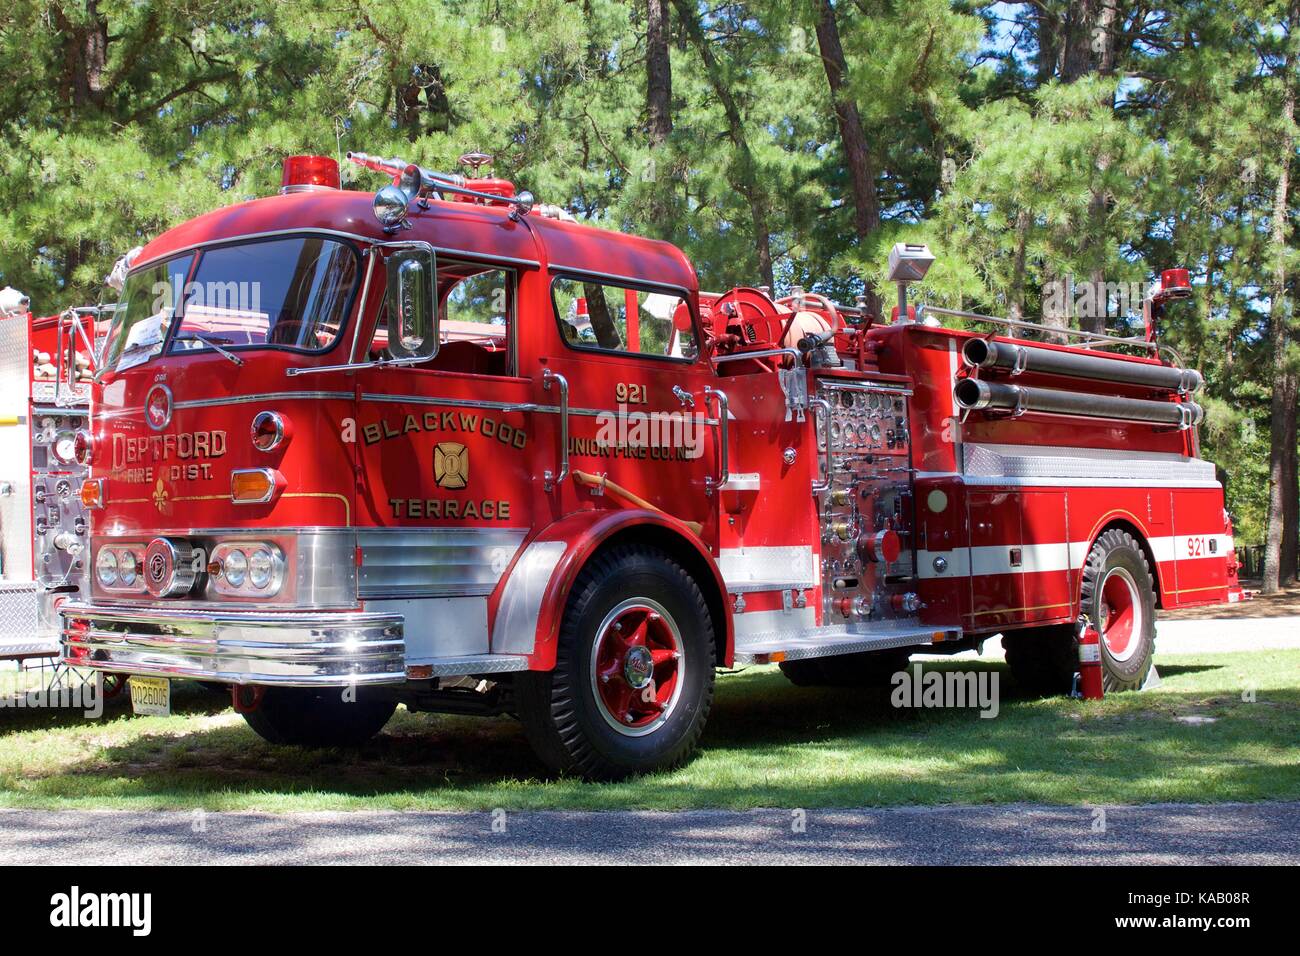 A 1964 Mack C95 pumper at the 37th Annual Fire Apparatus Show and Muster at WheatonArts, in Millville, NJ. Stock Photo